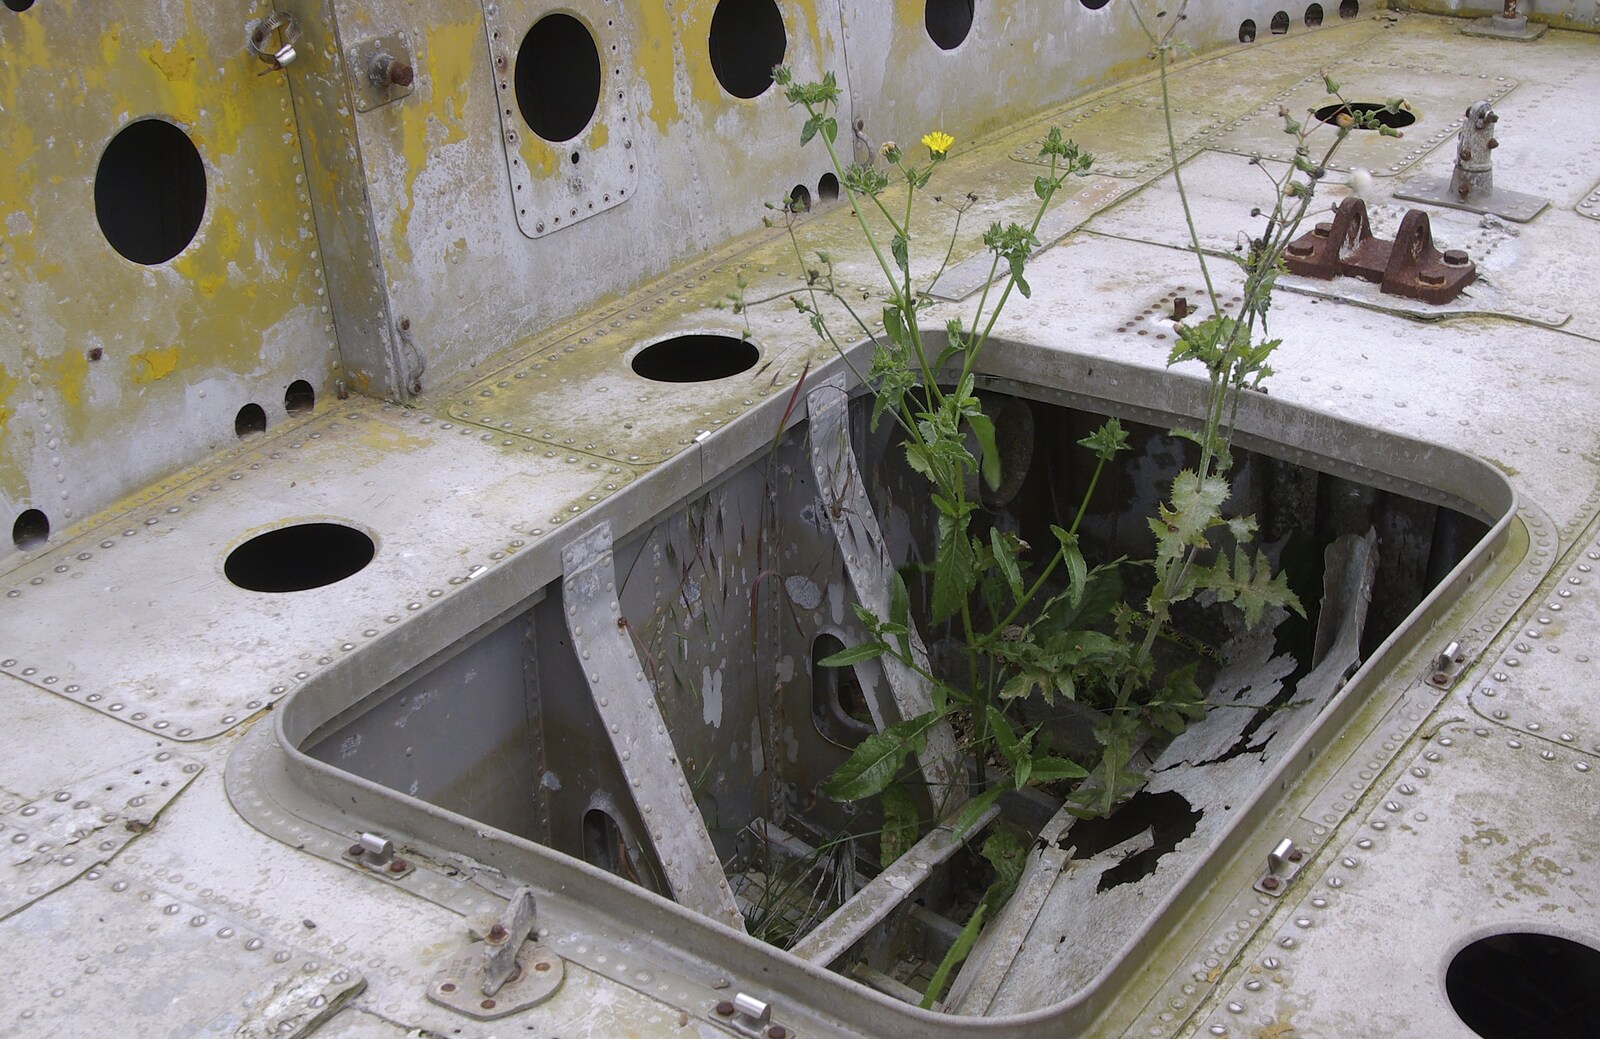 An MTB boat has foliage growing up through it from Debach And the B-17 "Liberty Belle", Suffolk - 12th July 2008